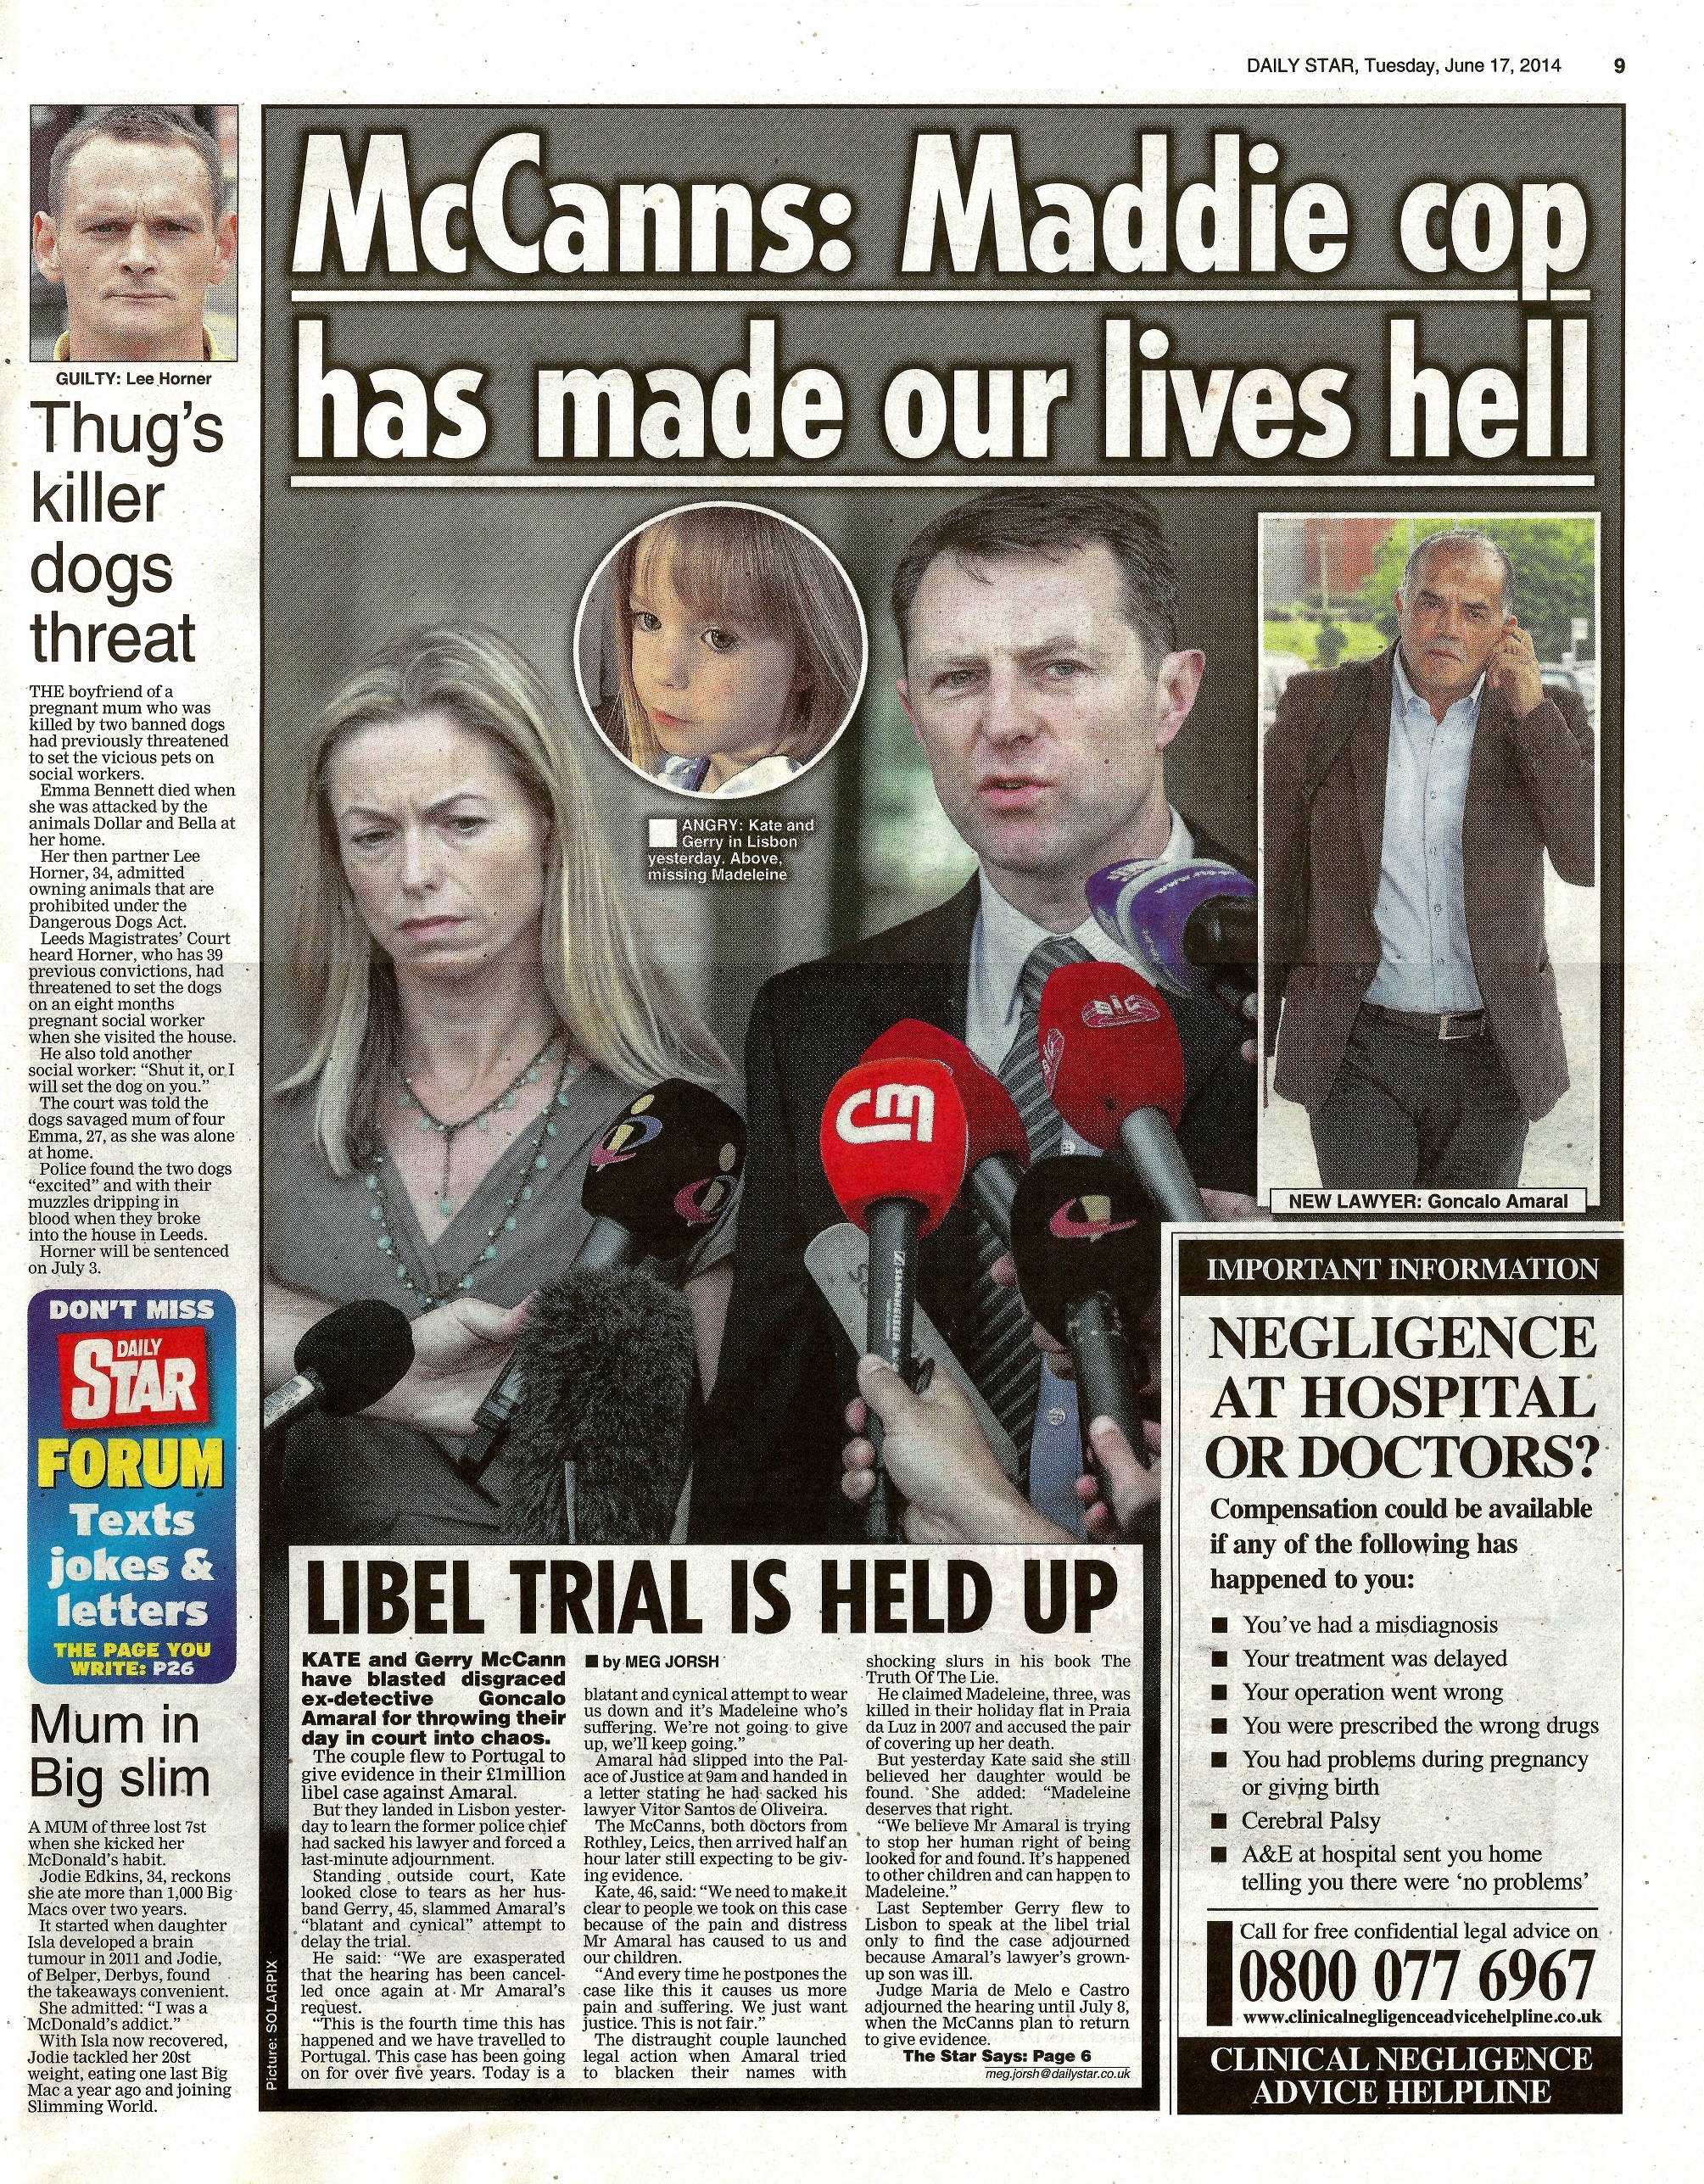 McCanns: Maddie cop has made our lives hell - Daily Star, 17 June 2014 (paper edition, page 9)